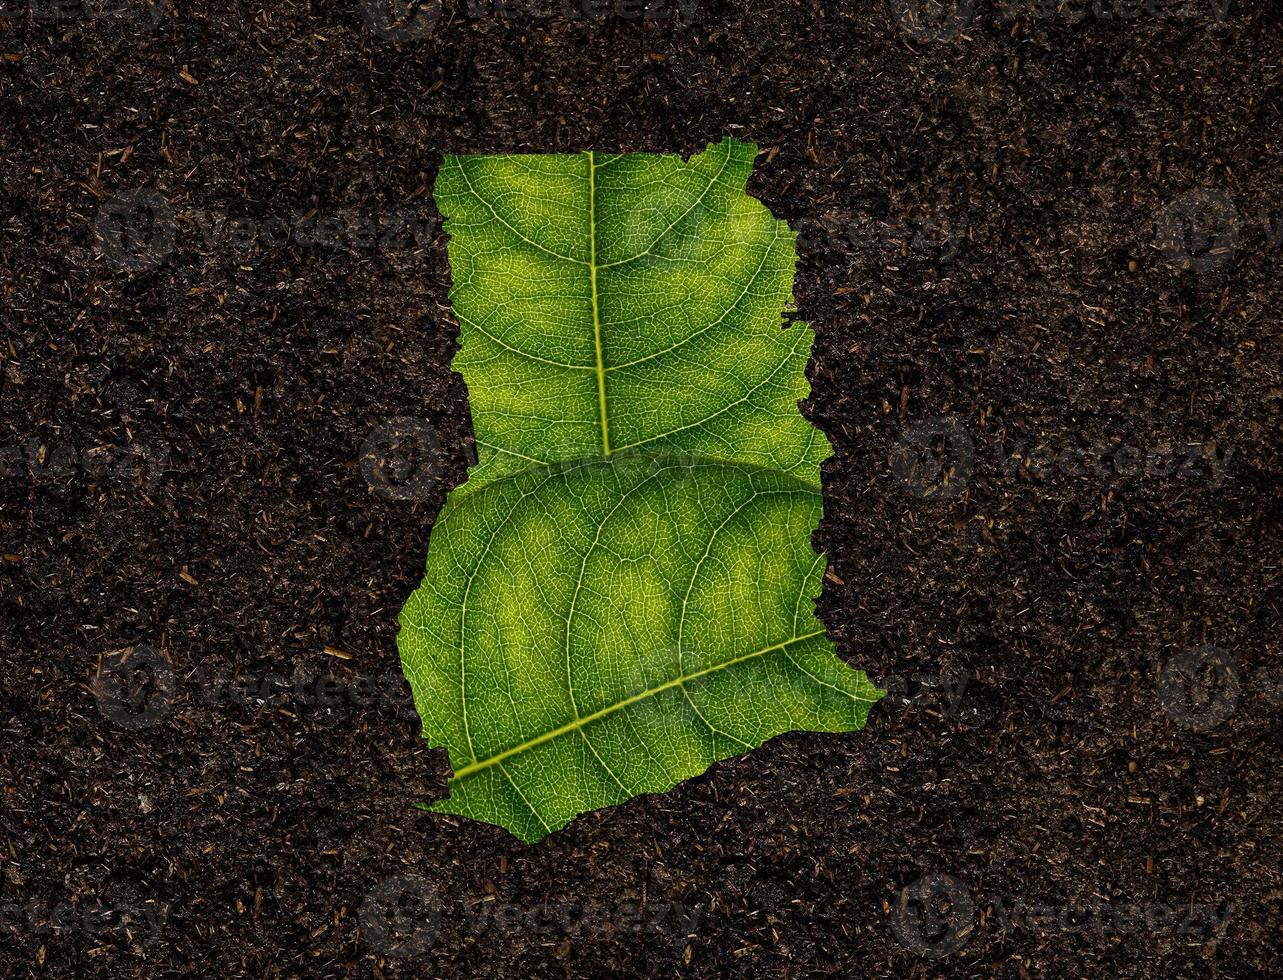 Ghana map made of green leaves on soil background ecology concept photo